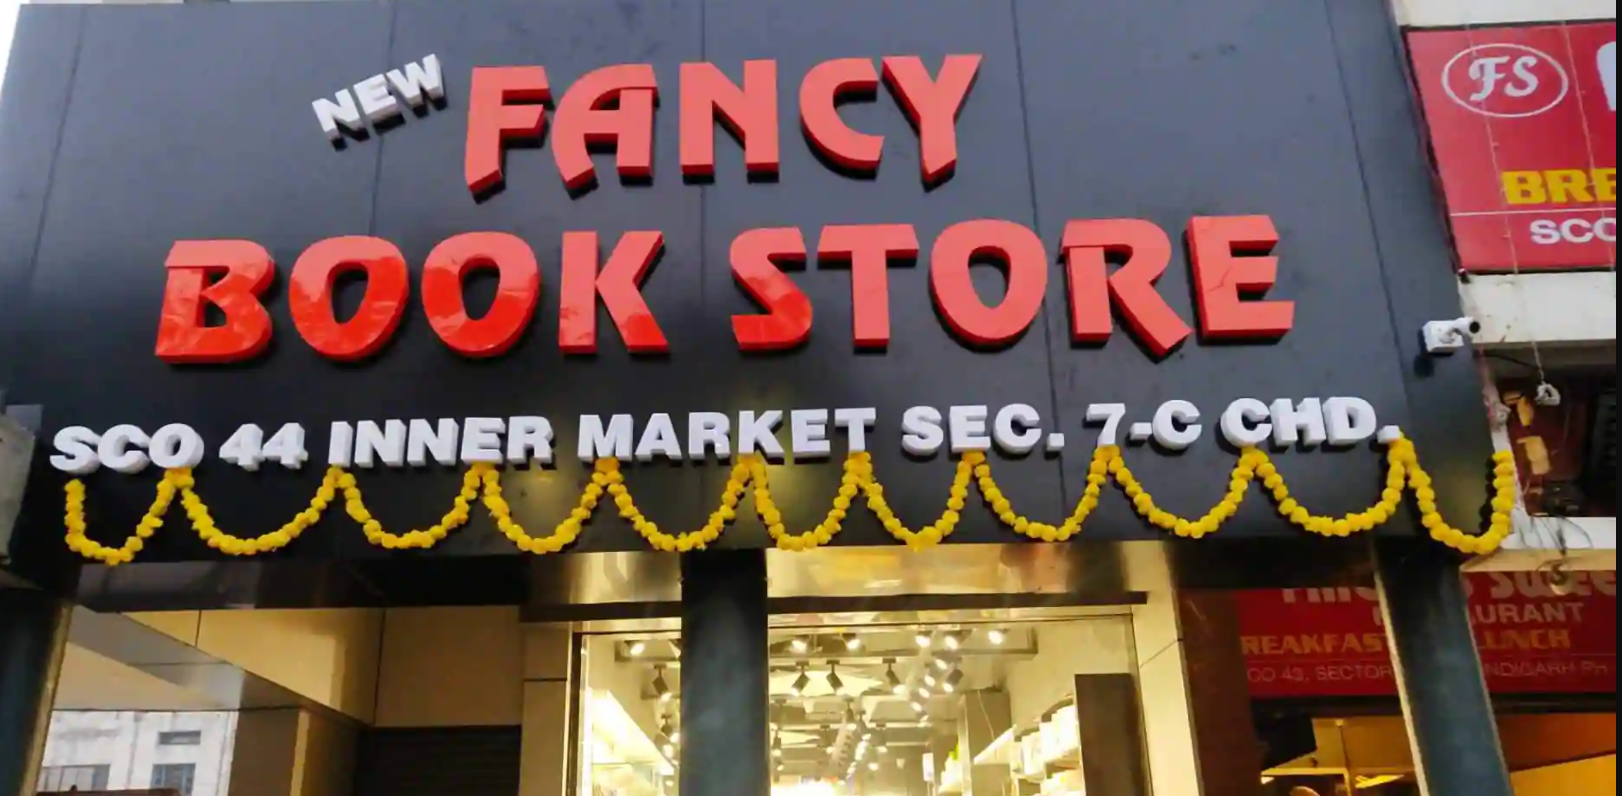 New Fancy Book Store,